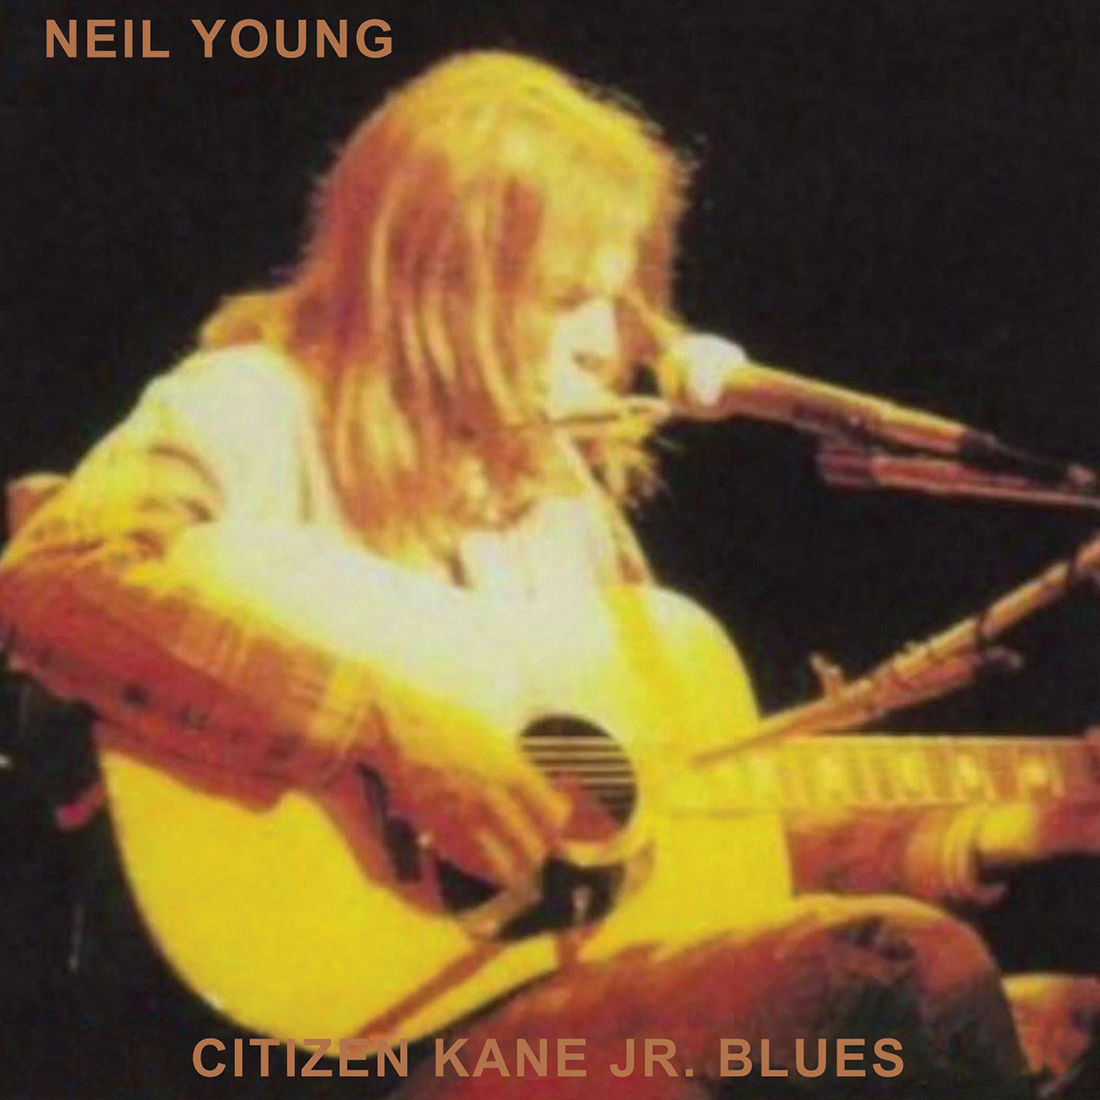 Neil Young Citizen Kane Jnr Blues (Live At The Bottom Line) New York  1974: CD Recordstore